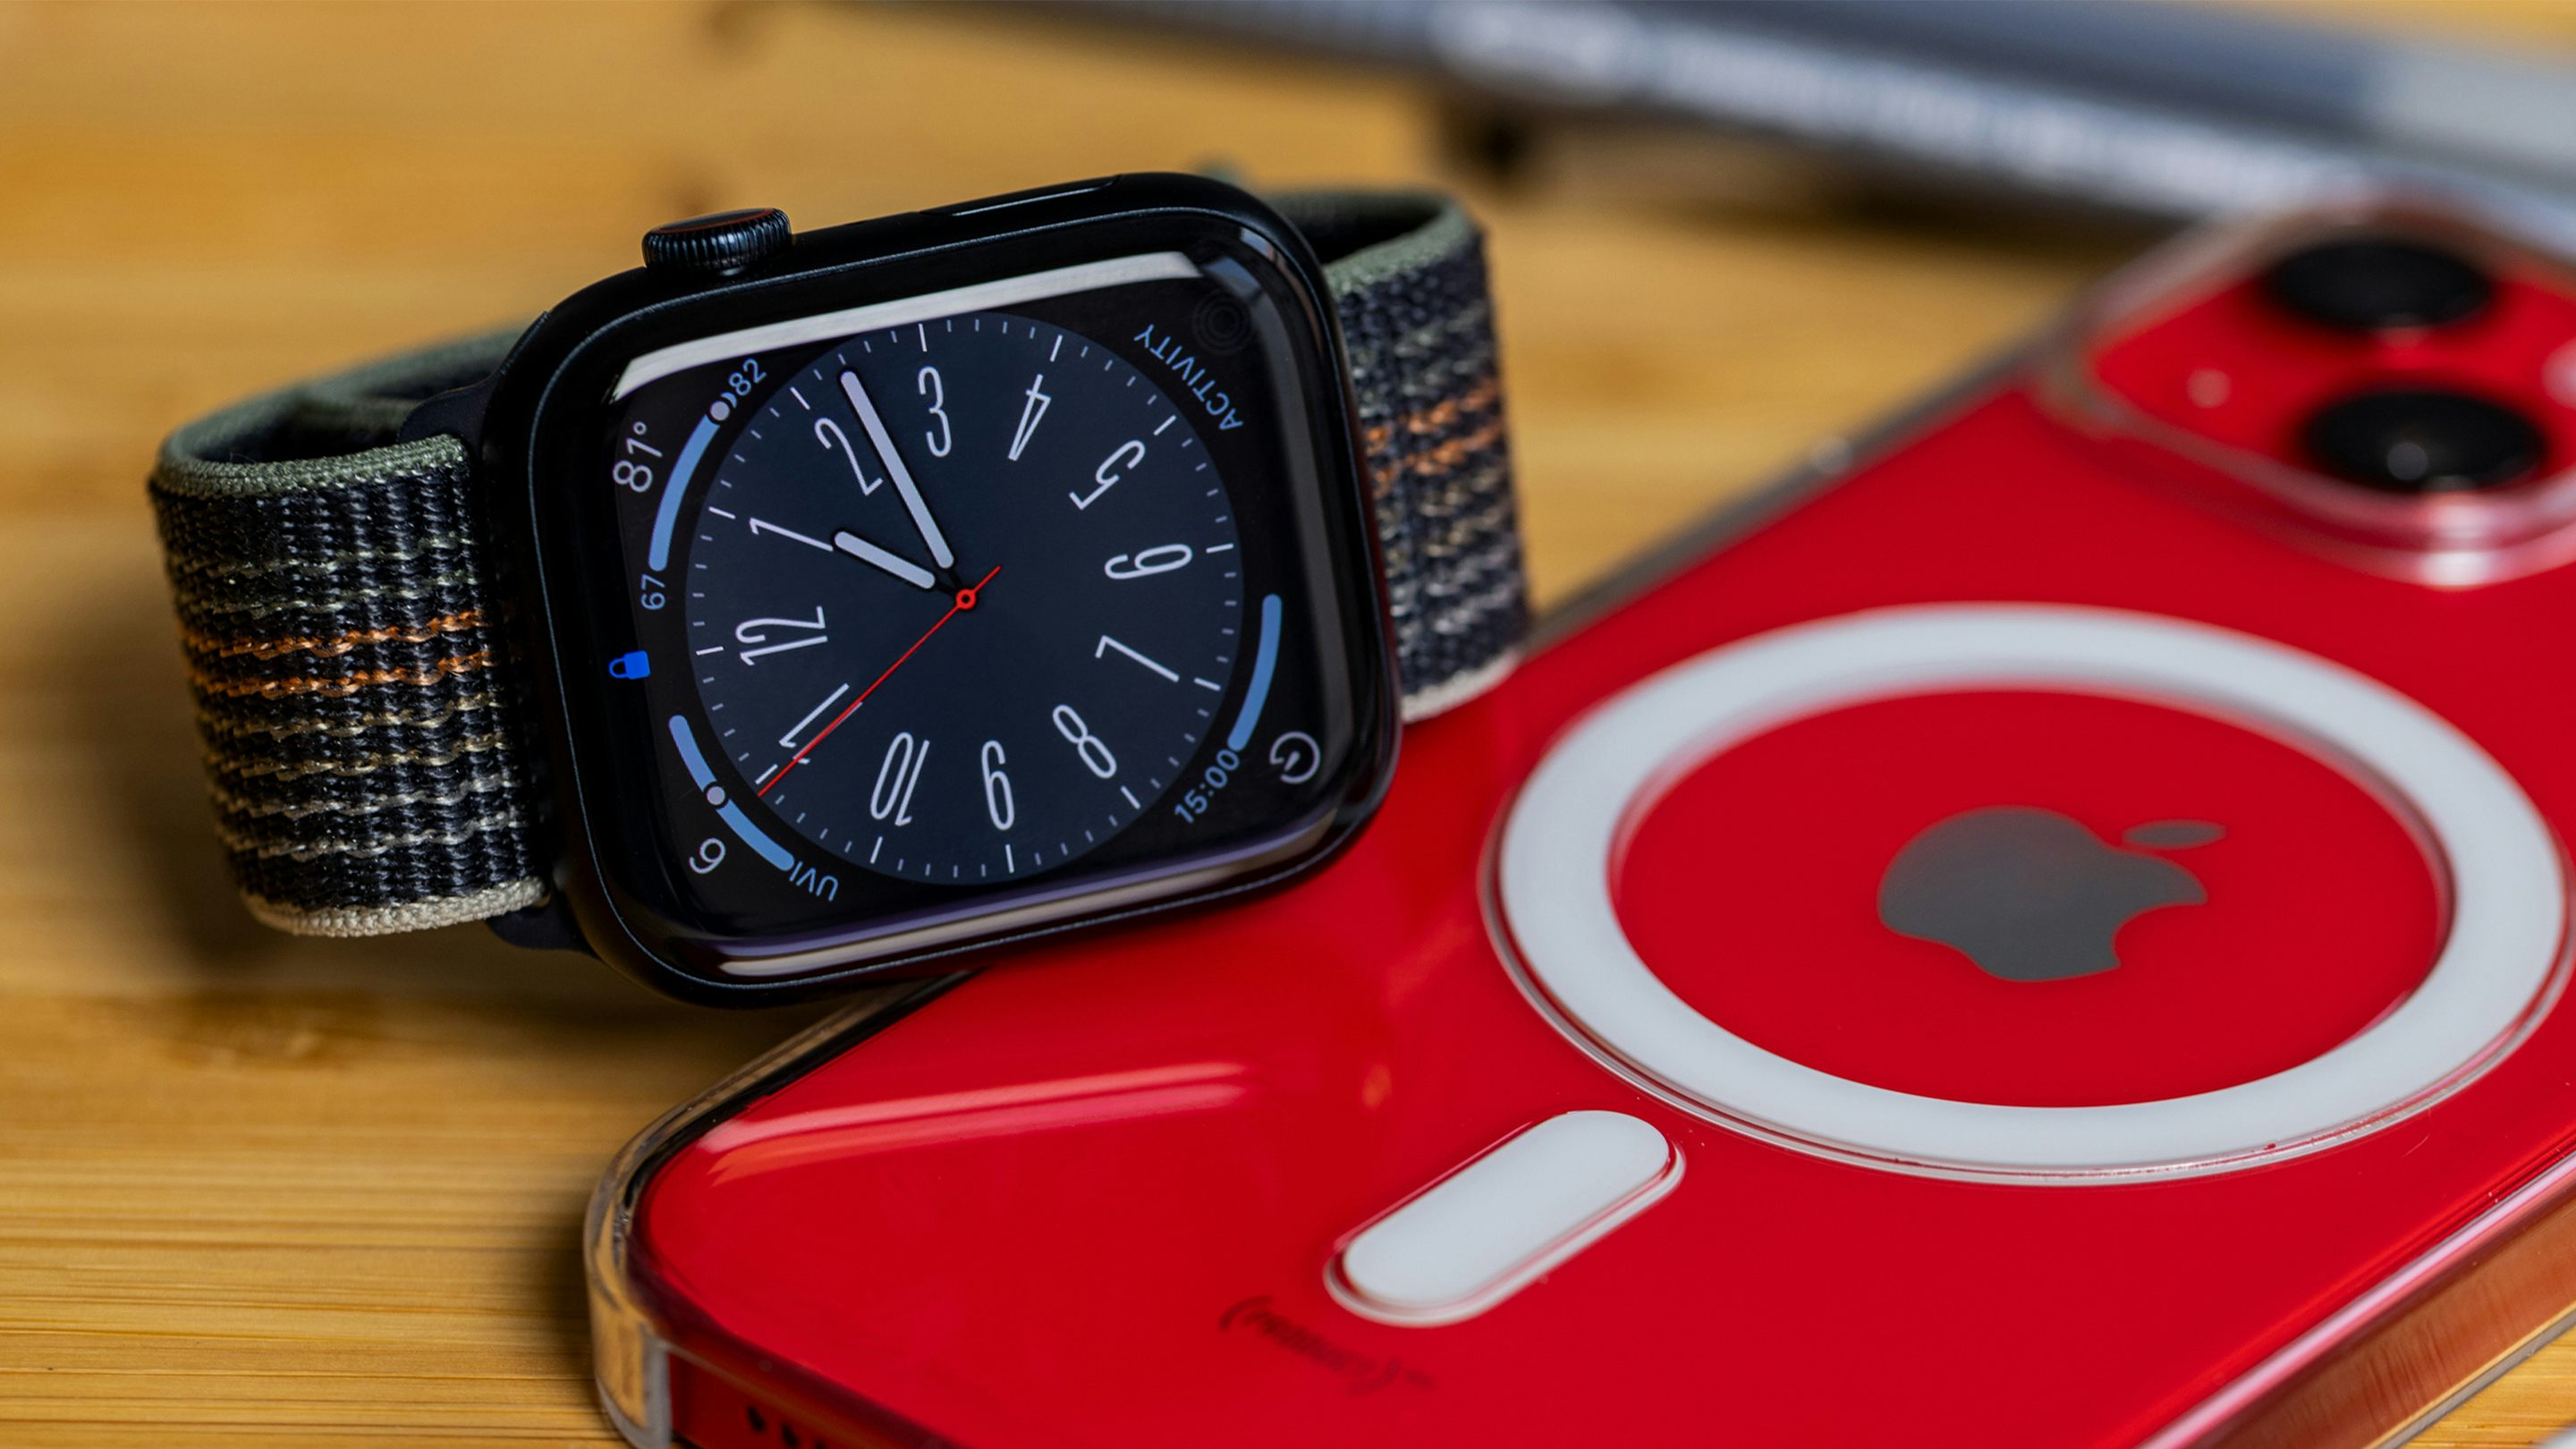 Apple Watch Series 5: The iWatch Beginners, Dummies and Seniors